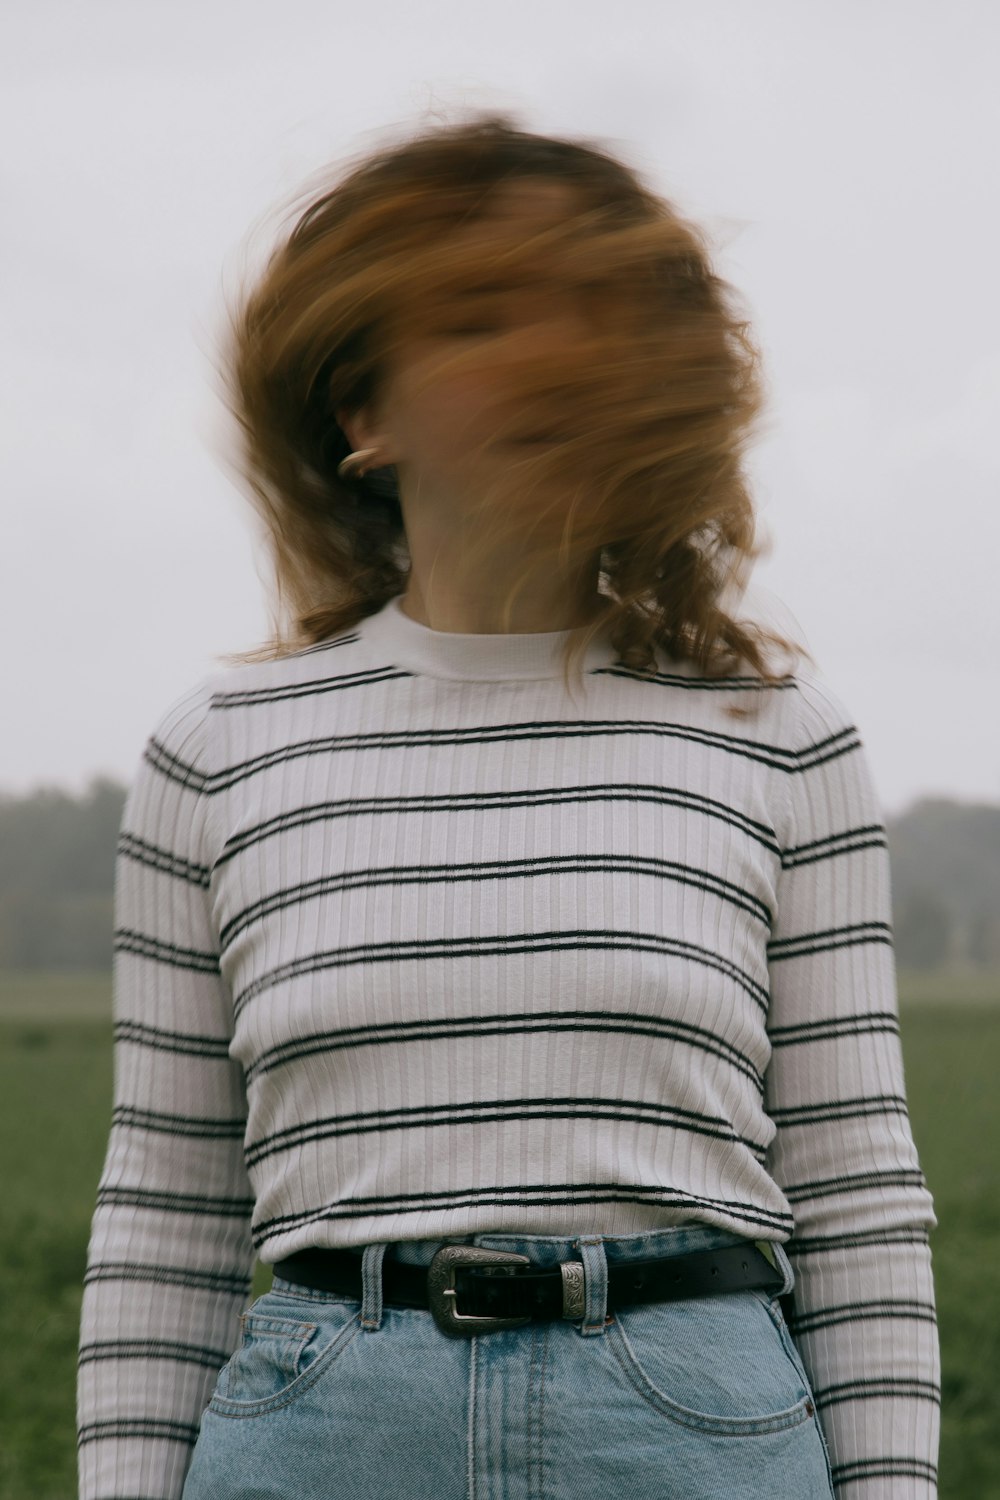 woman in white and black striped shirt standing on green grass field during daytime